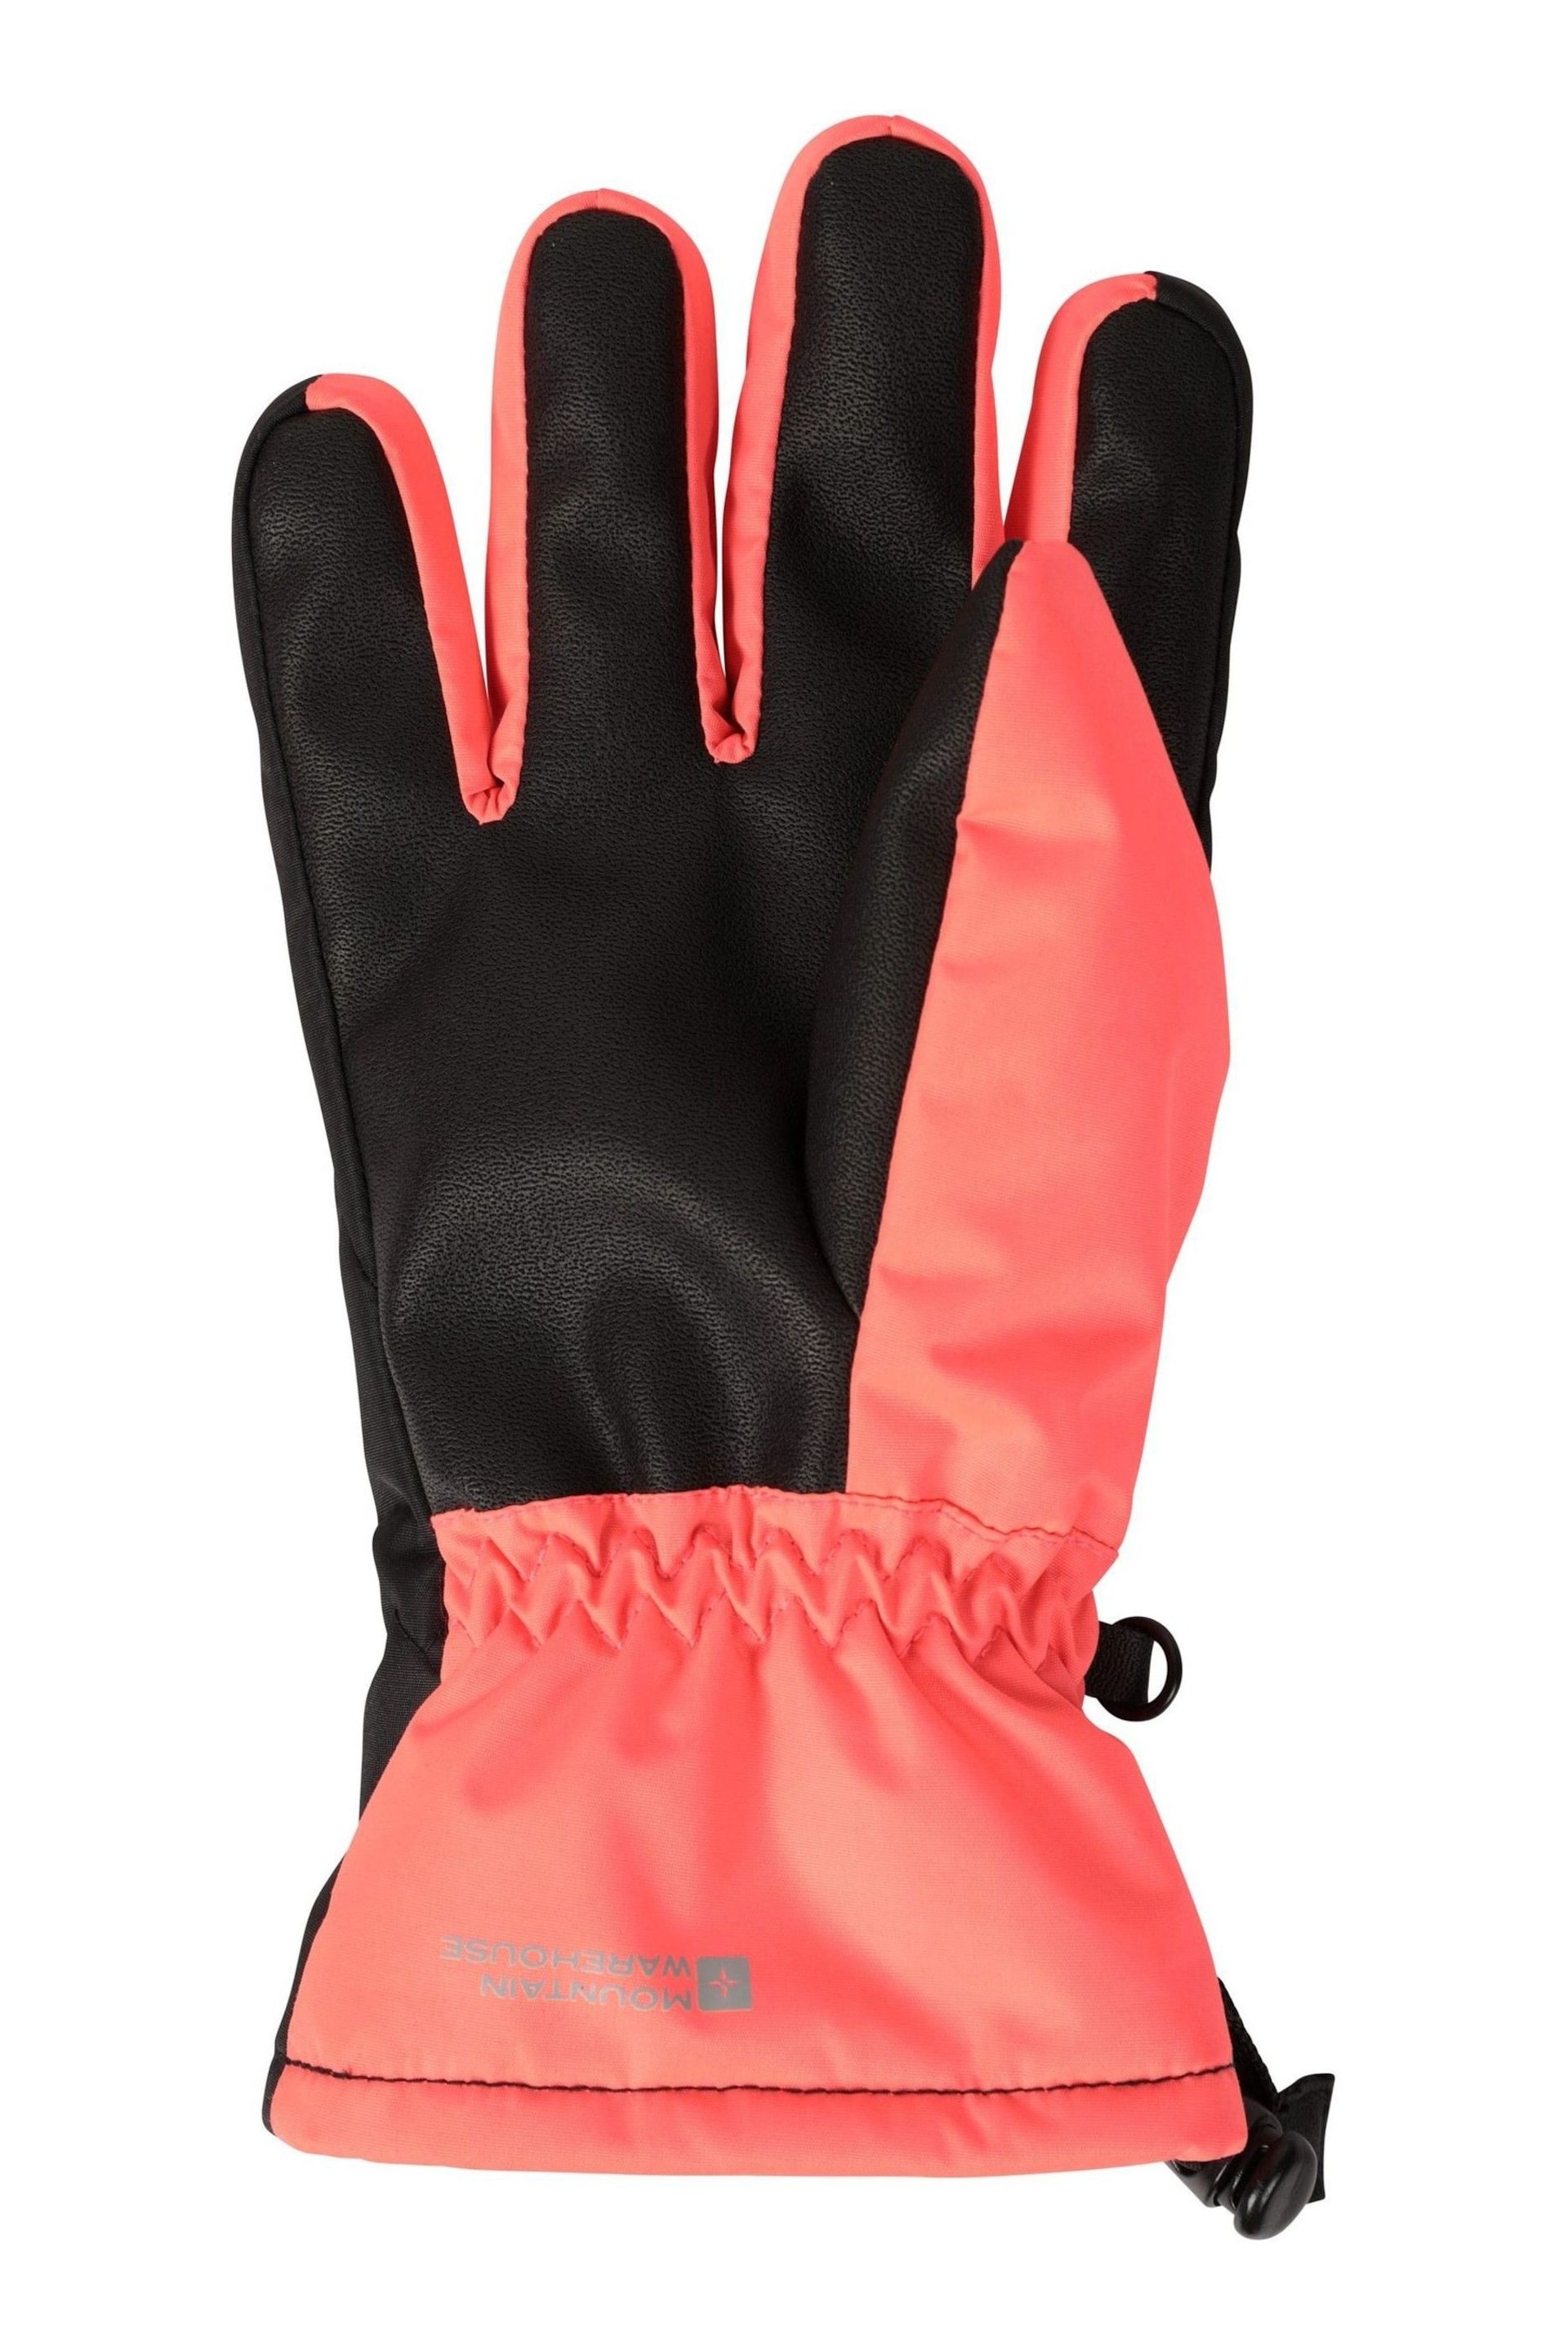 Mountain Warehouse Red Extreme Kids Waterproof Fleece Lined Ski Gloves - Image 2 of 6